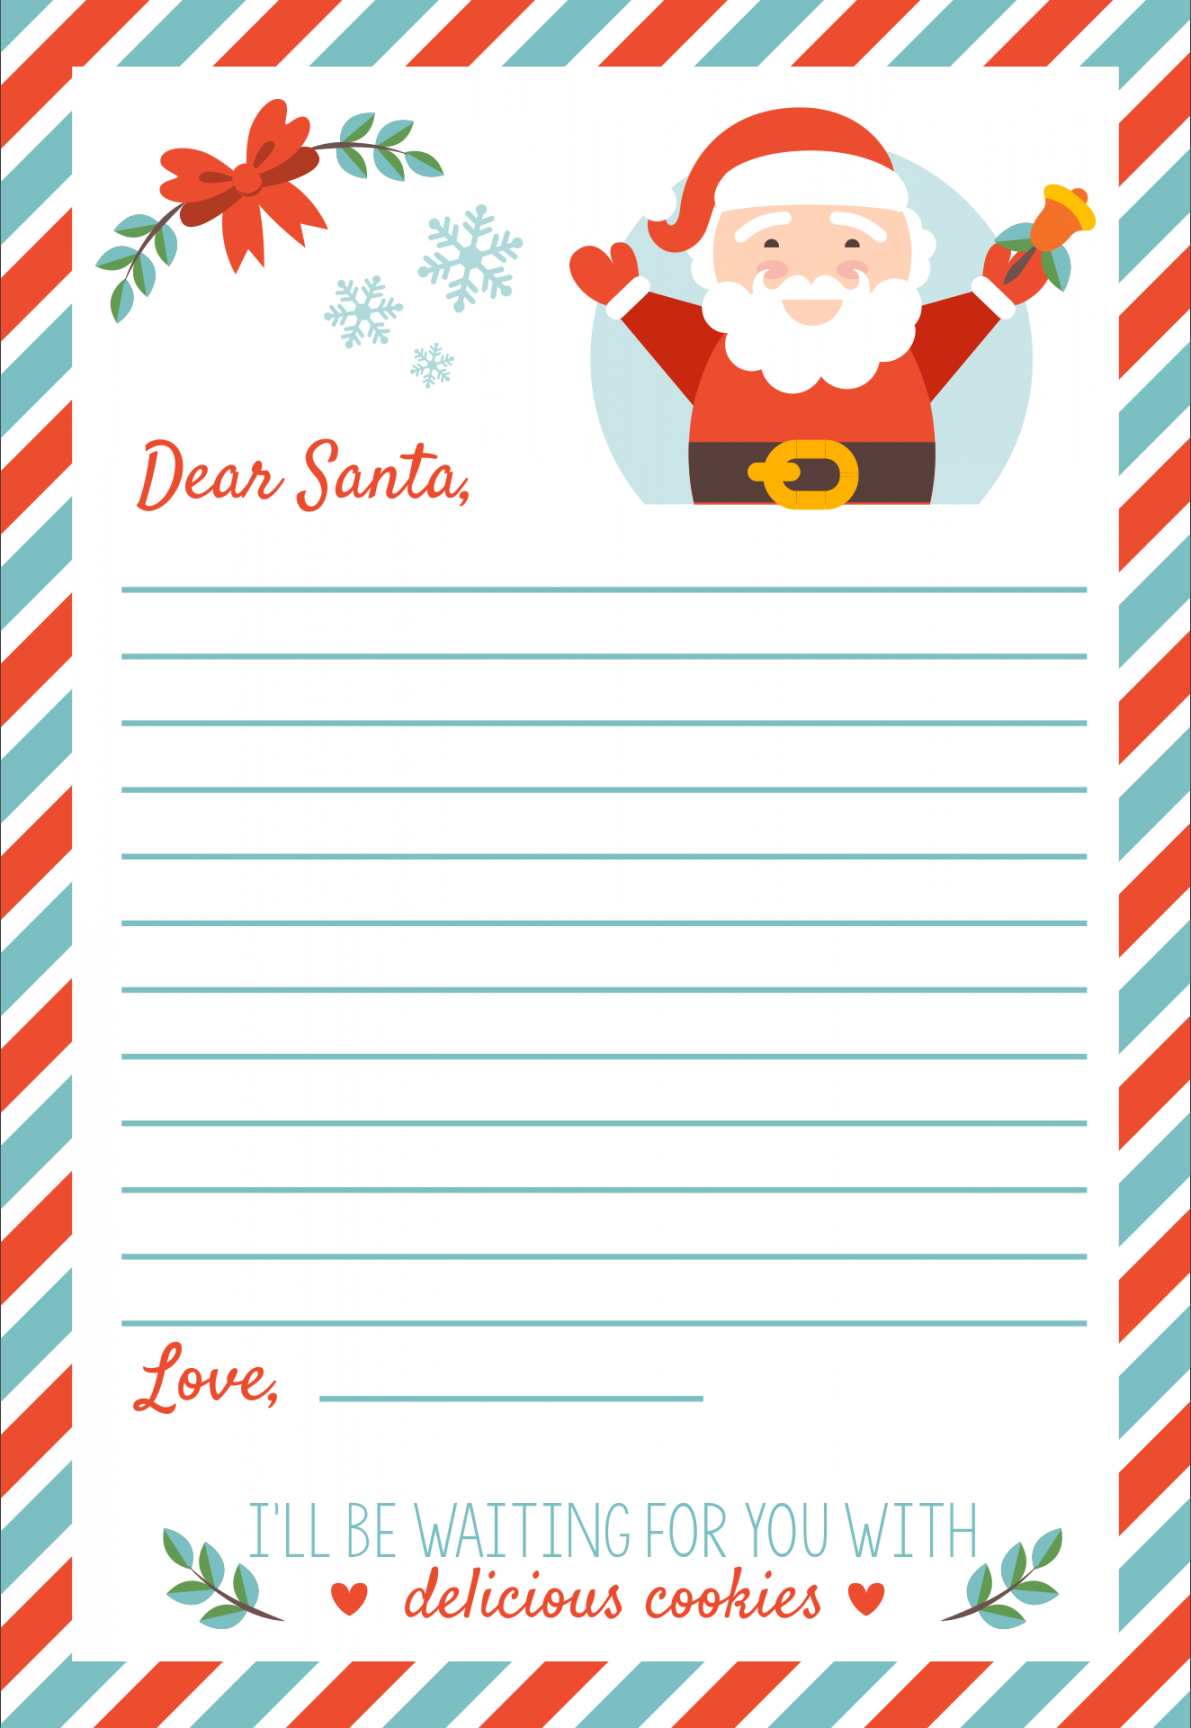 Best Free Printable Christmas Letter Templates - printablee - Christmas Letter Templates Free Printable